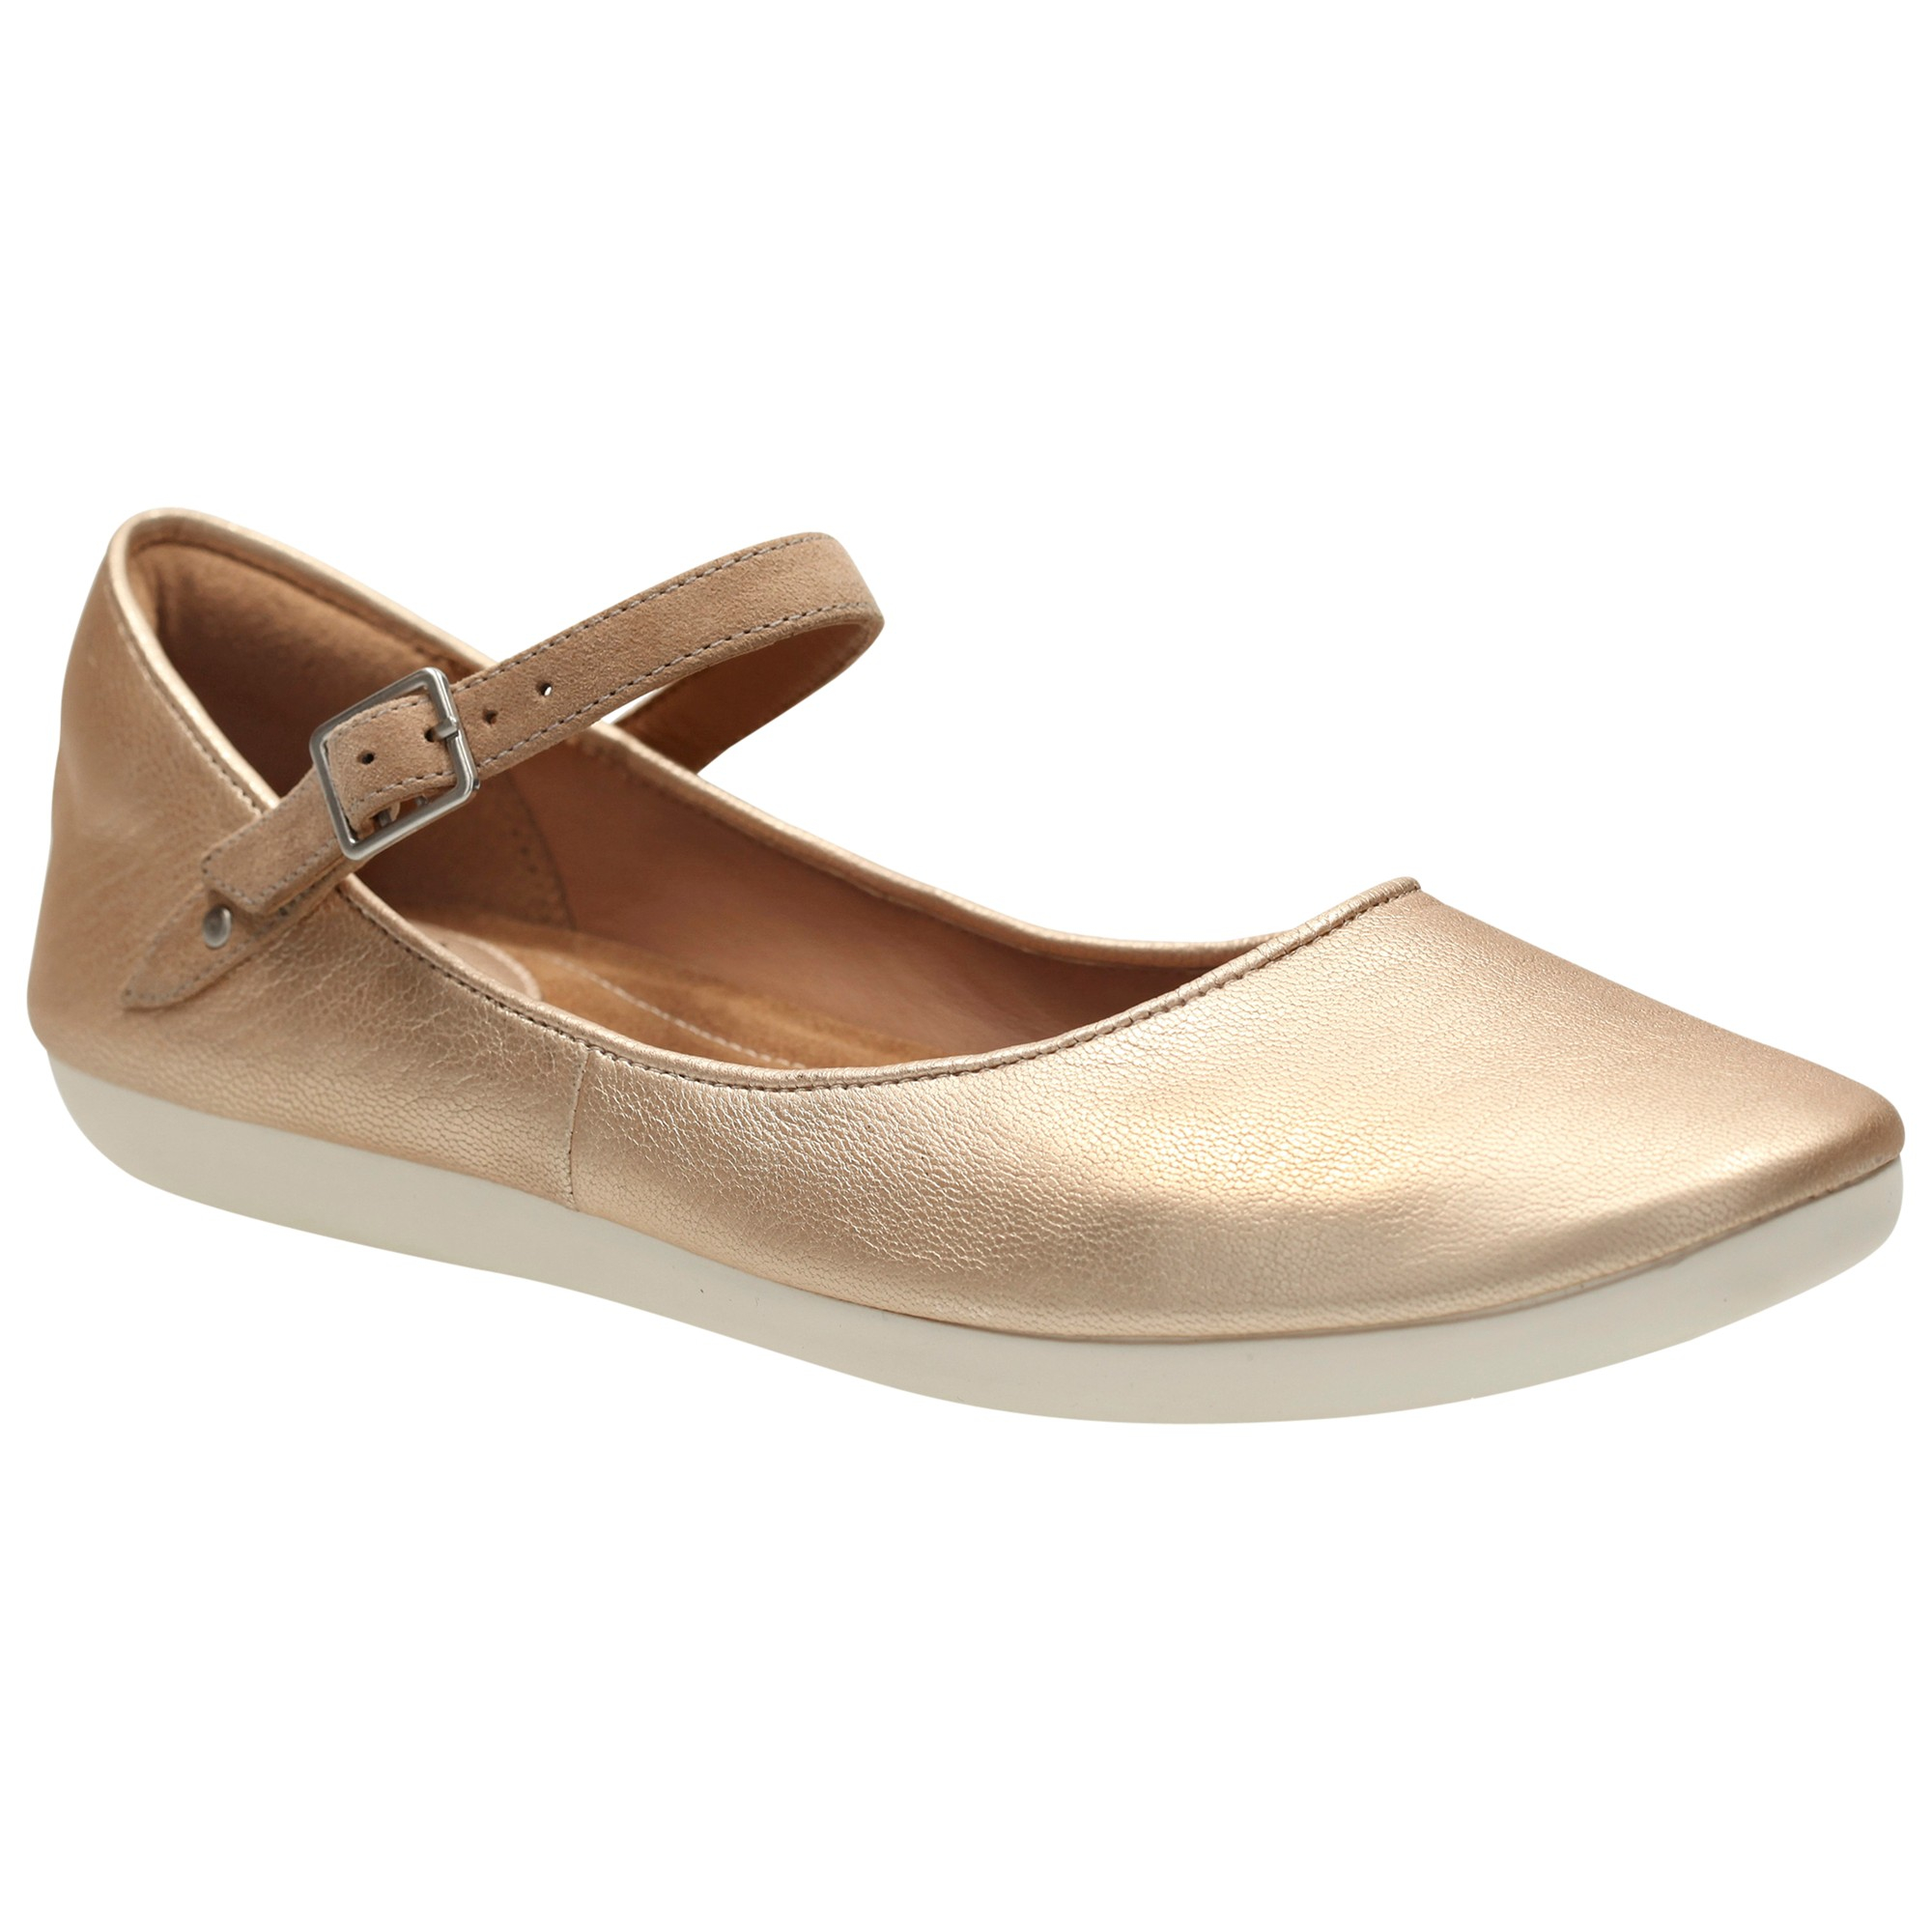 Clarks Feature Film Leather Pumps in Metallic | Lyst UK